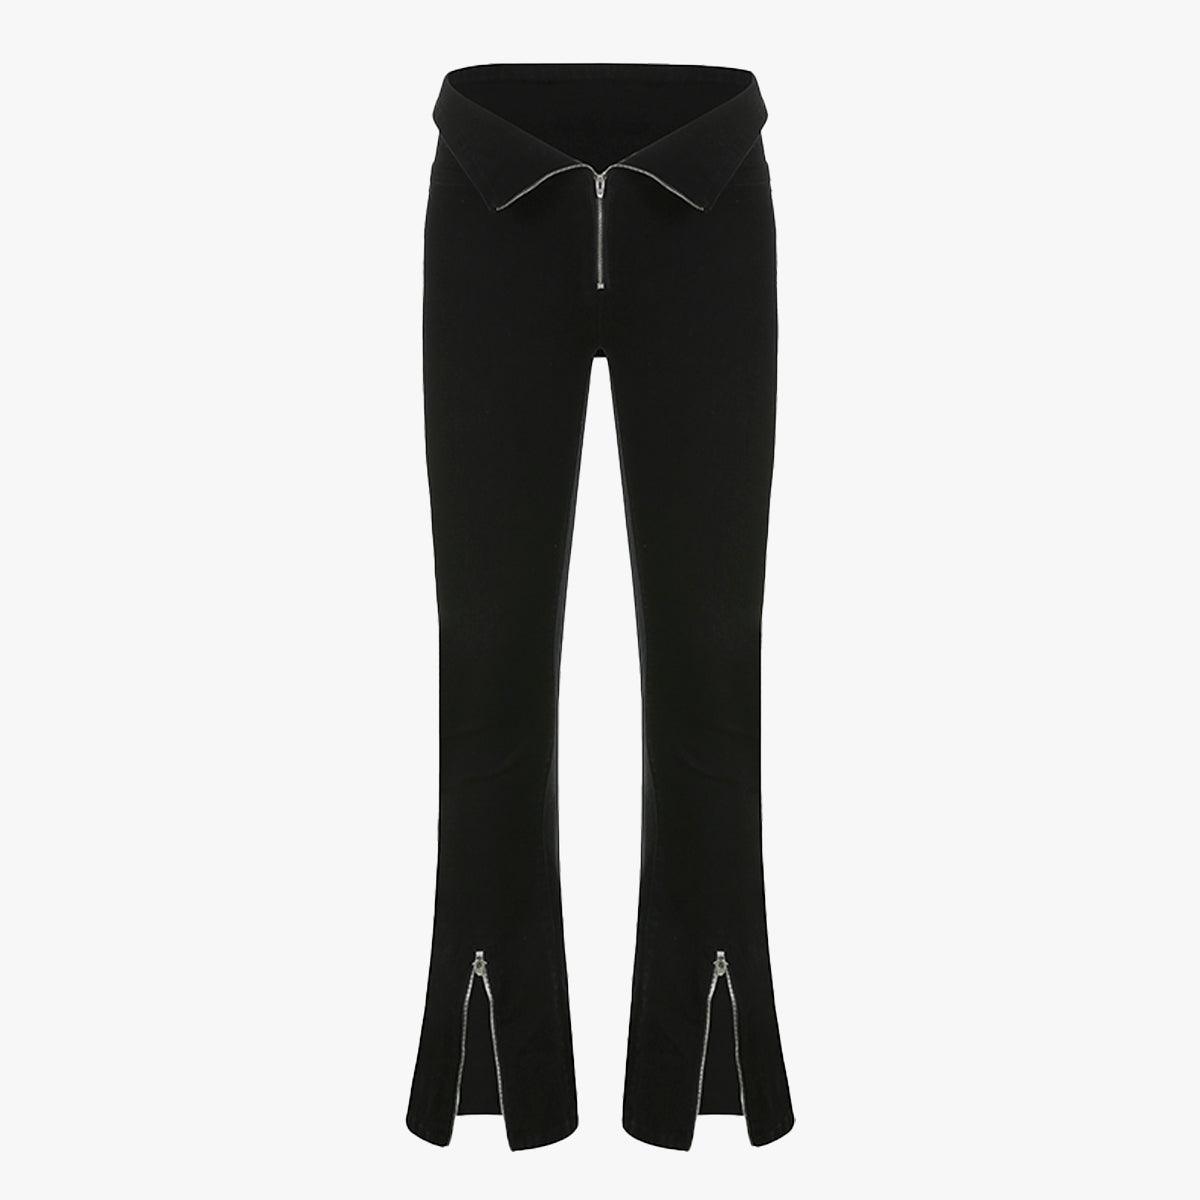 Zip Girl Flare Black Jeans - Aesthetic Clothes Shop